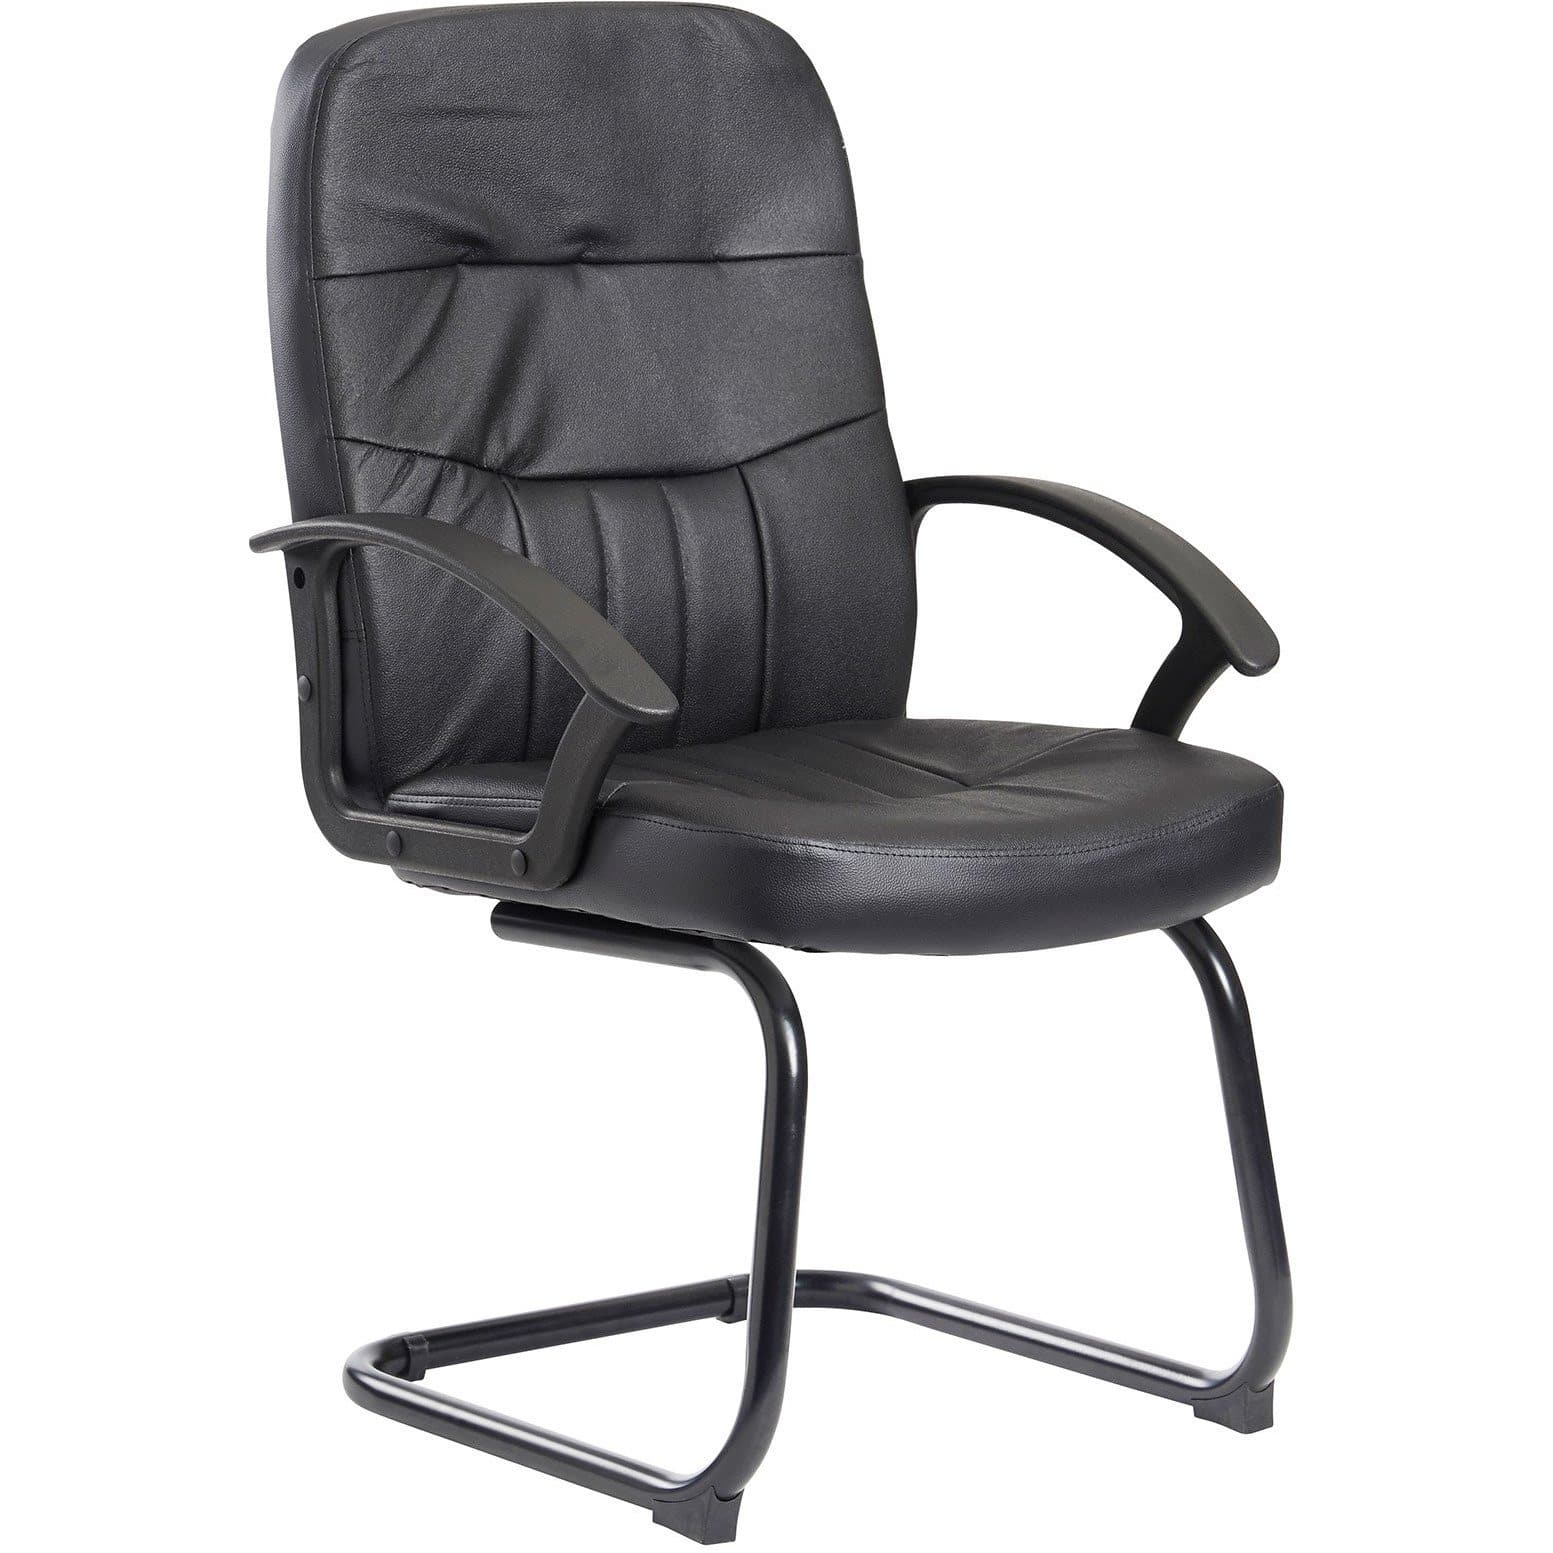 Office meeting chair on white bakground